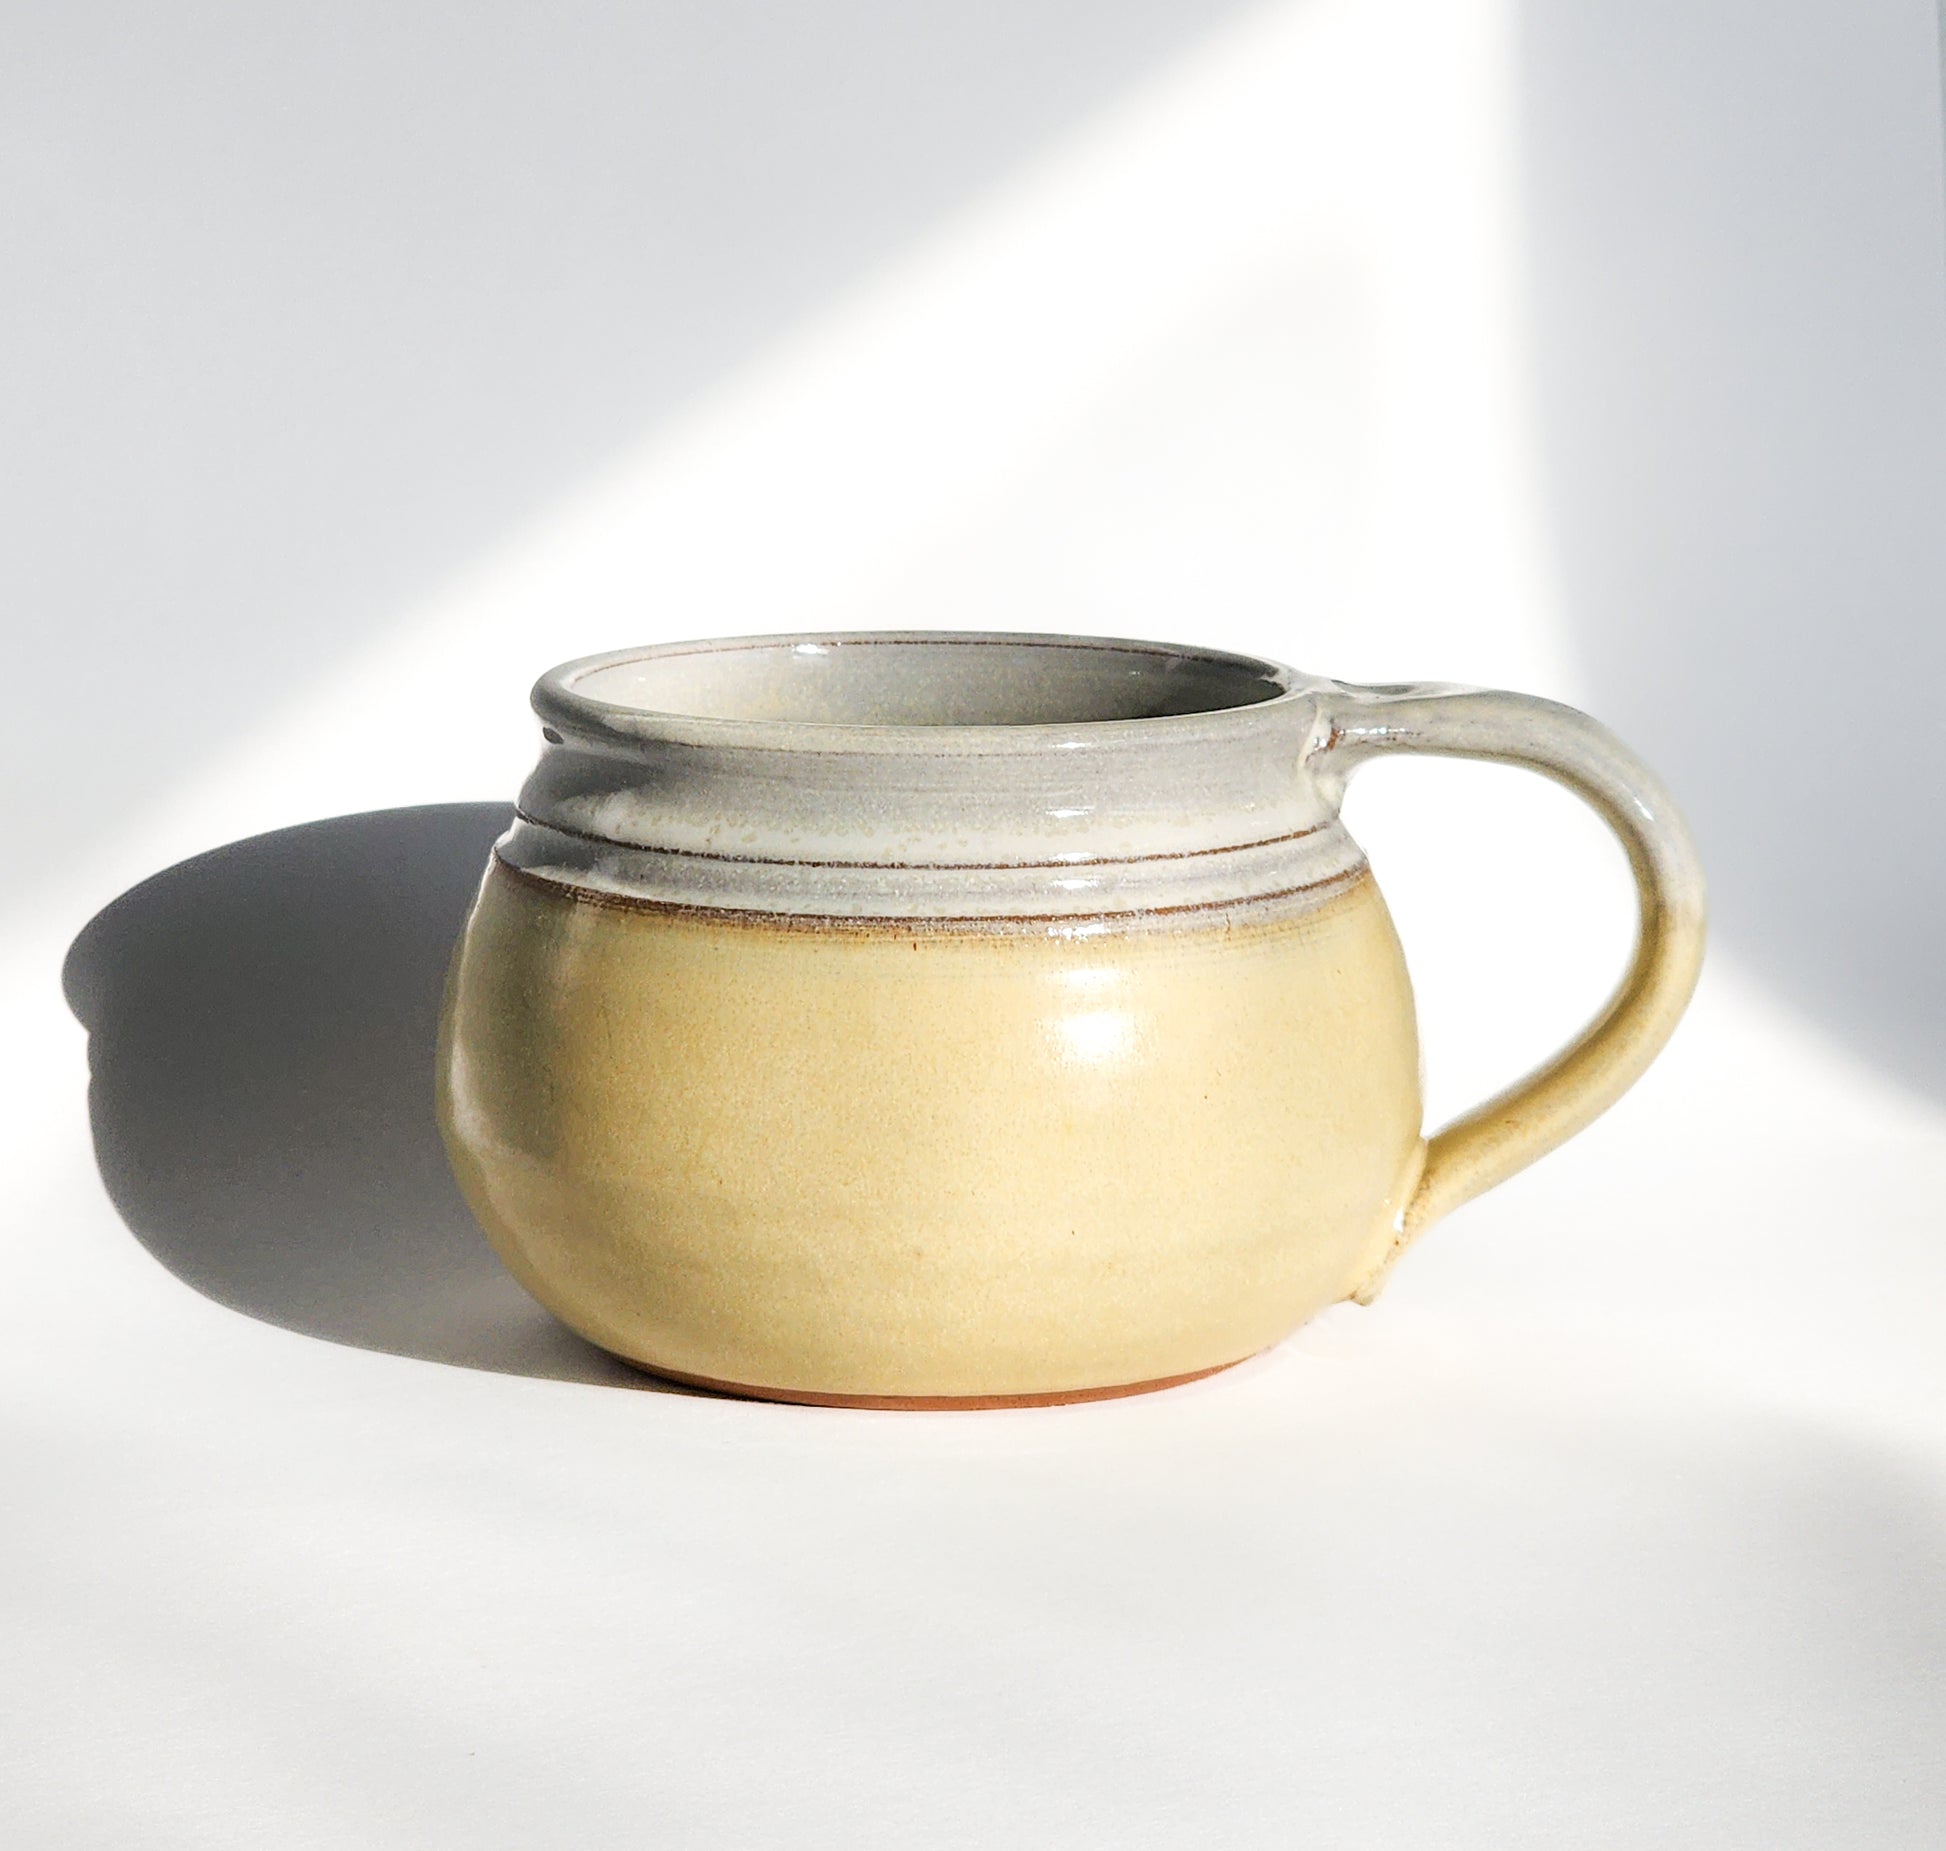 Image: Clinton Pottery's 24 oz Cereal/Soup Mug in Butter Yellow – A warm and inviting addition to your kitchen, this machine washable mug seamlessly blends artistry with functionality. The gentle Butter Yellow color adds a touch of sunshine, reminiscent of golden fields and cozy kitchens. Perfect for savoring your favorite cereal or soup with a dash of comforting charm.